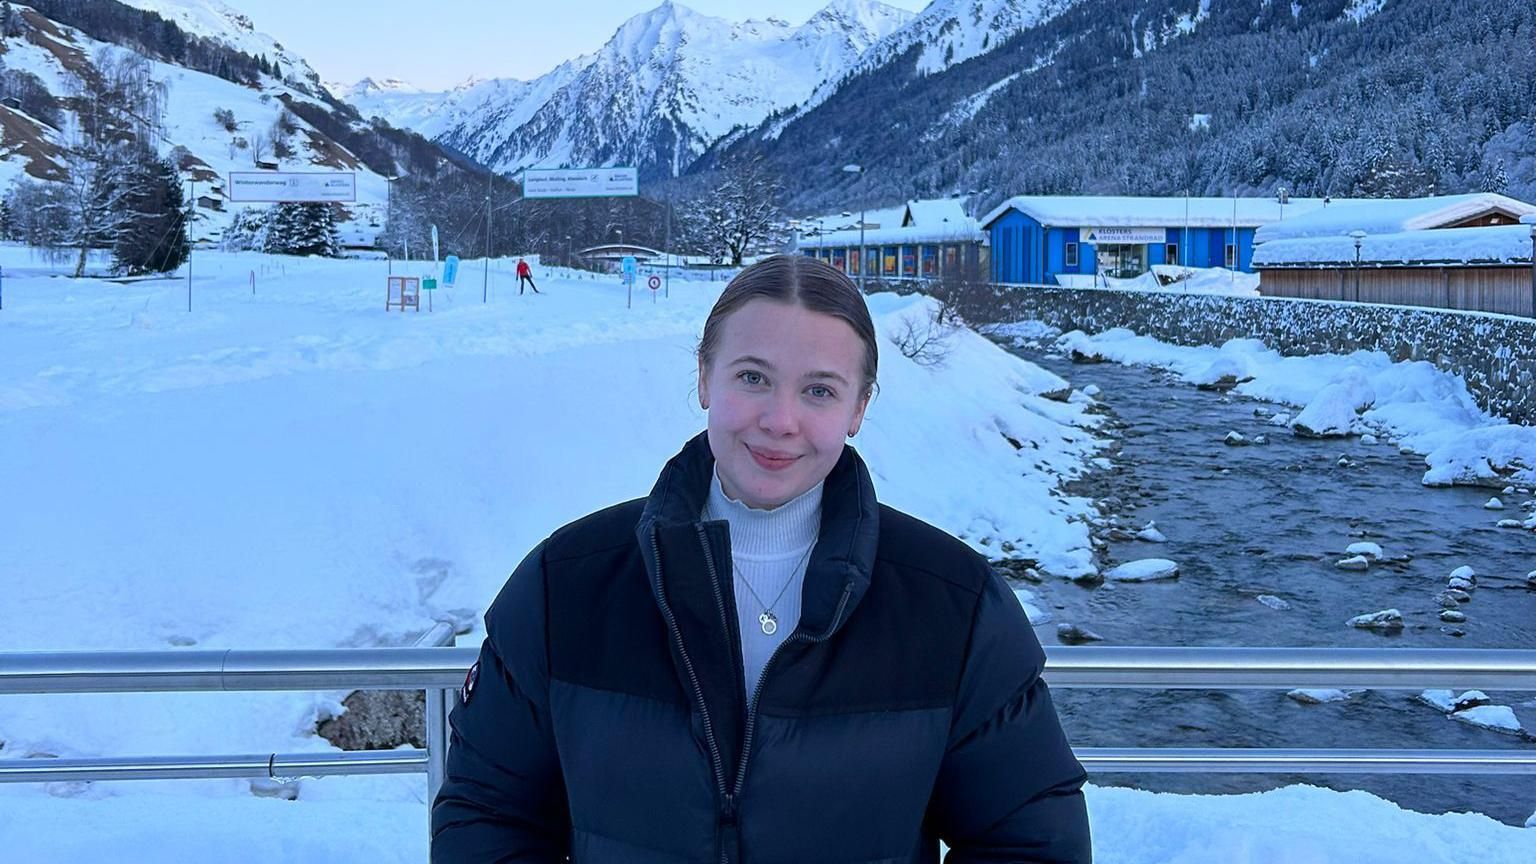 A young white woman wearing a warm navy blue jacket smiles at the camera in front of a snowy mountain scene